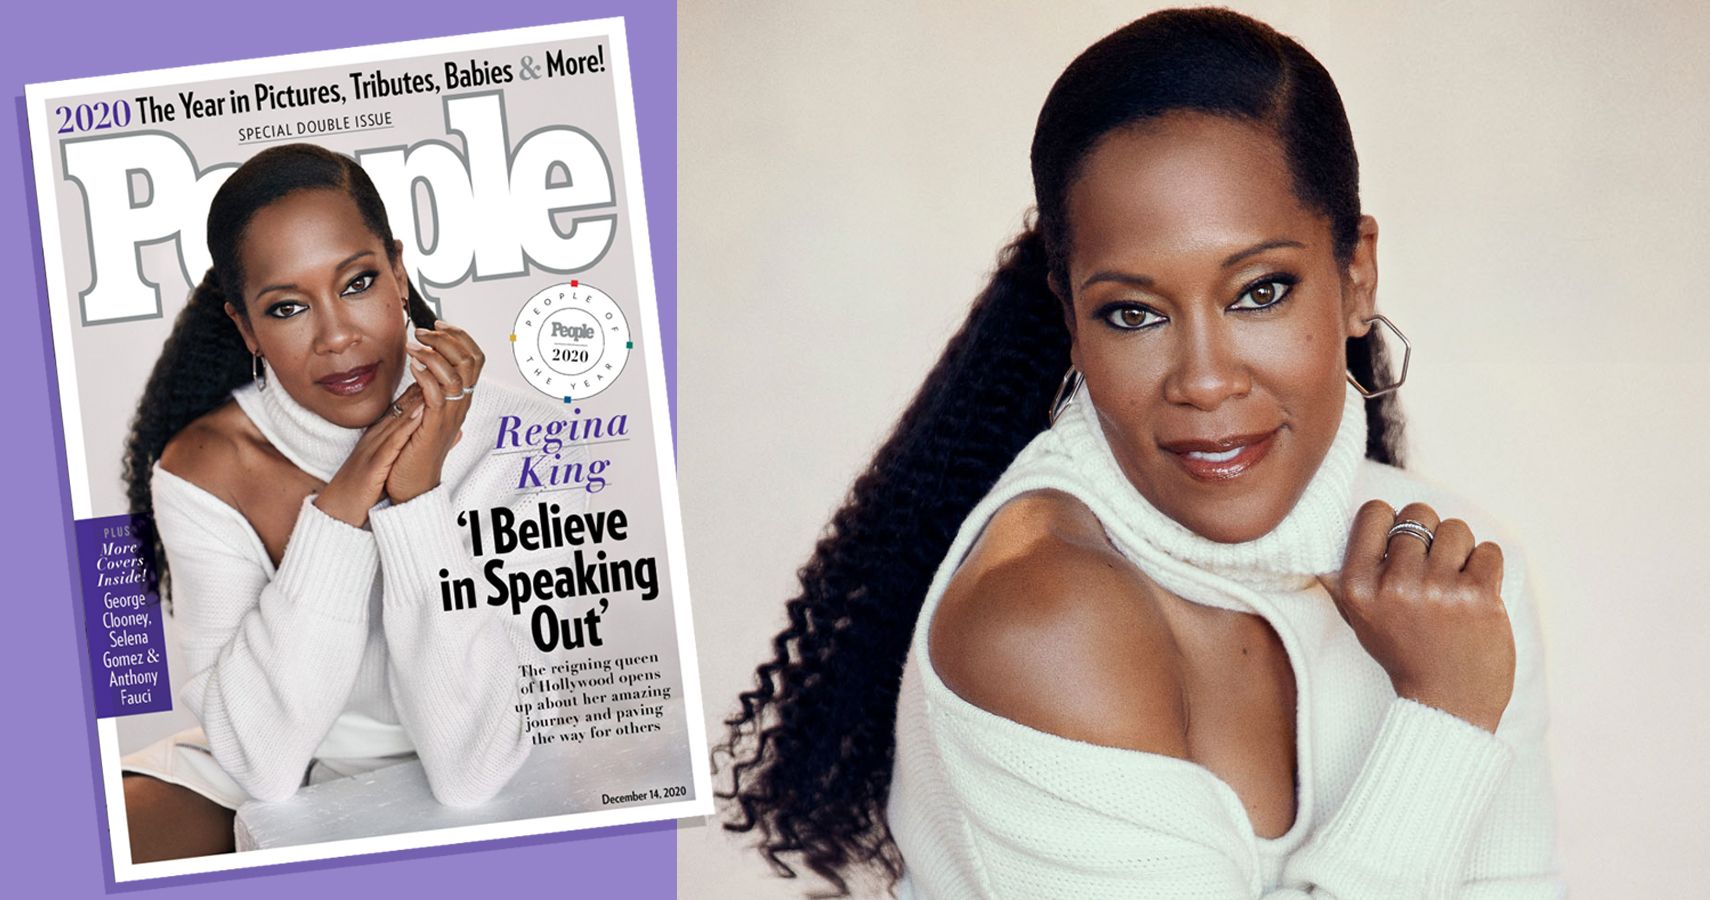 Mom And Actress Regina King Named One Of PEOPLE’s ‘People Of The Year’